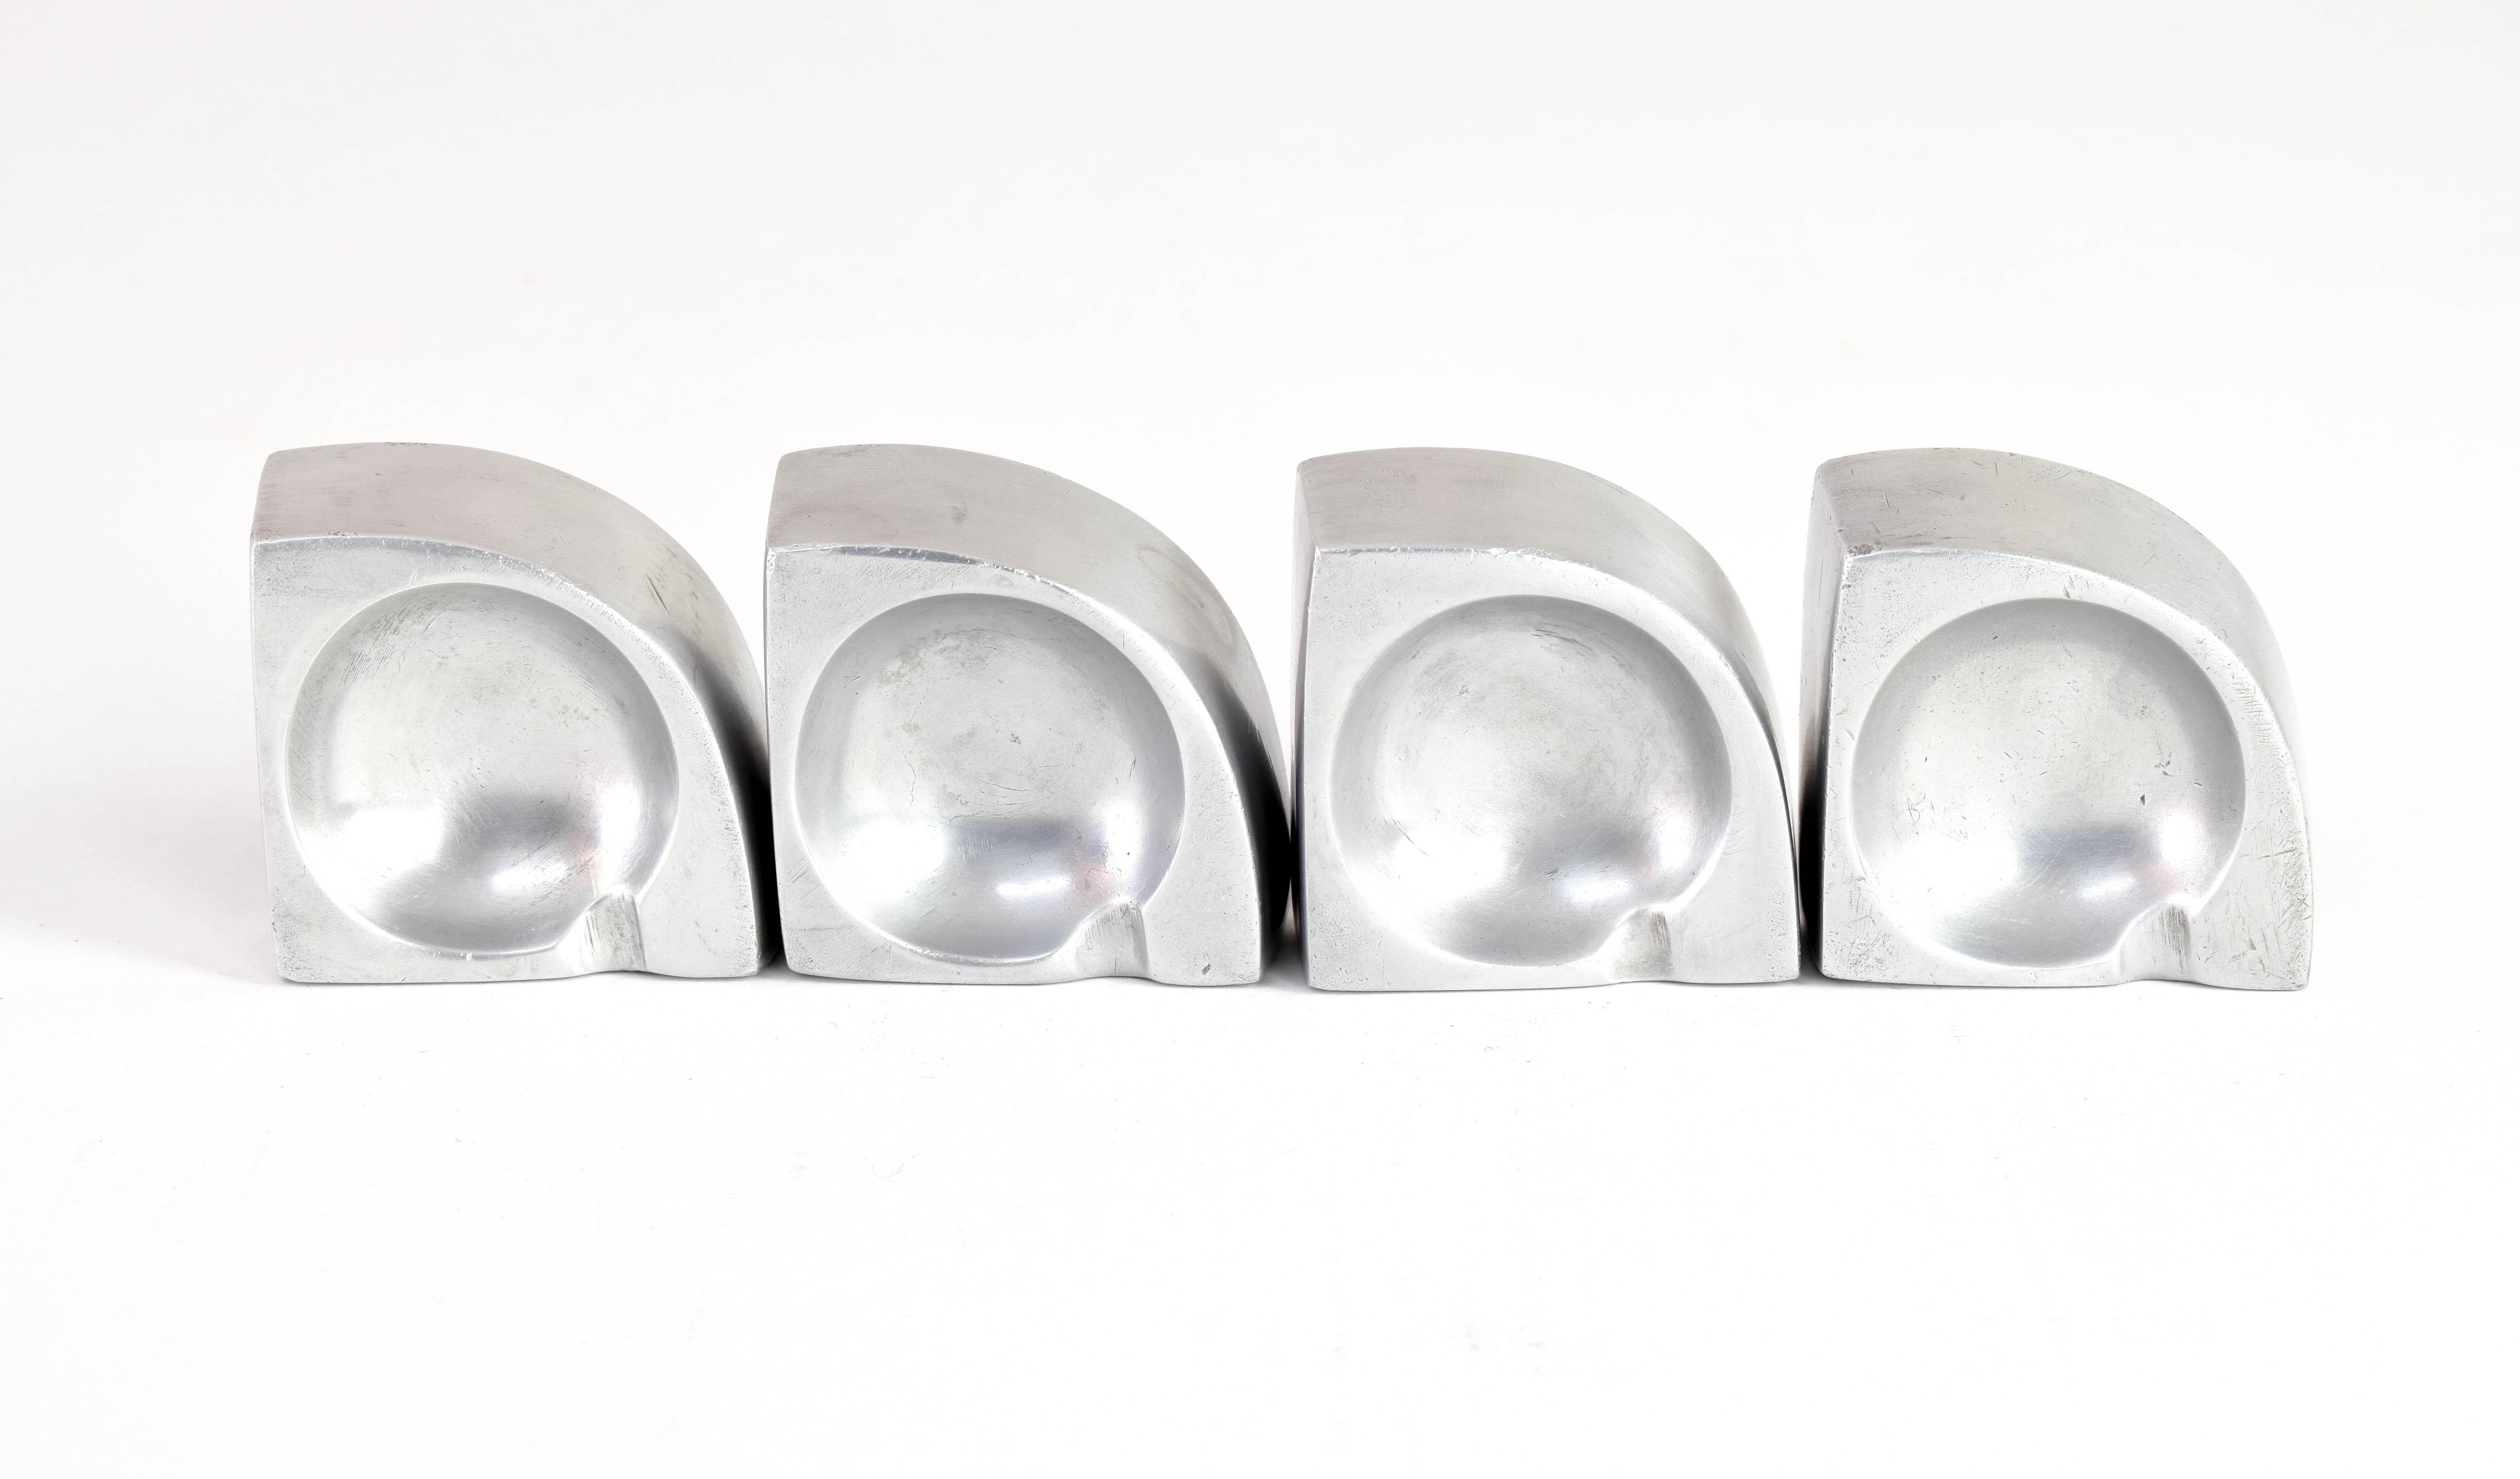 Mid Century Scandinavian Modern Handcrafted Aluminum Four Piece Ashtray, 1960 For Sale 2